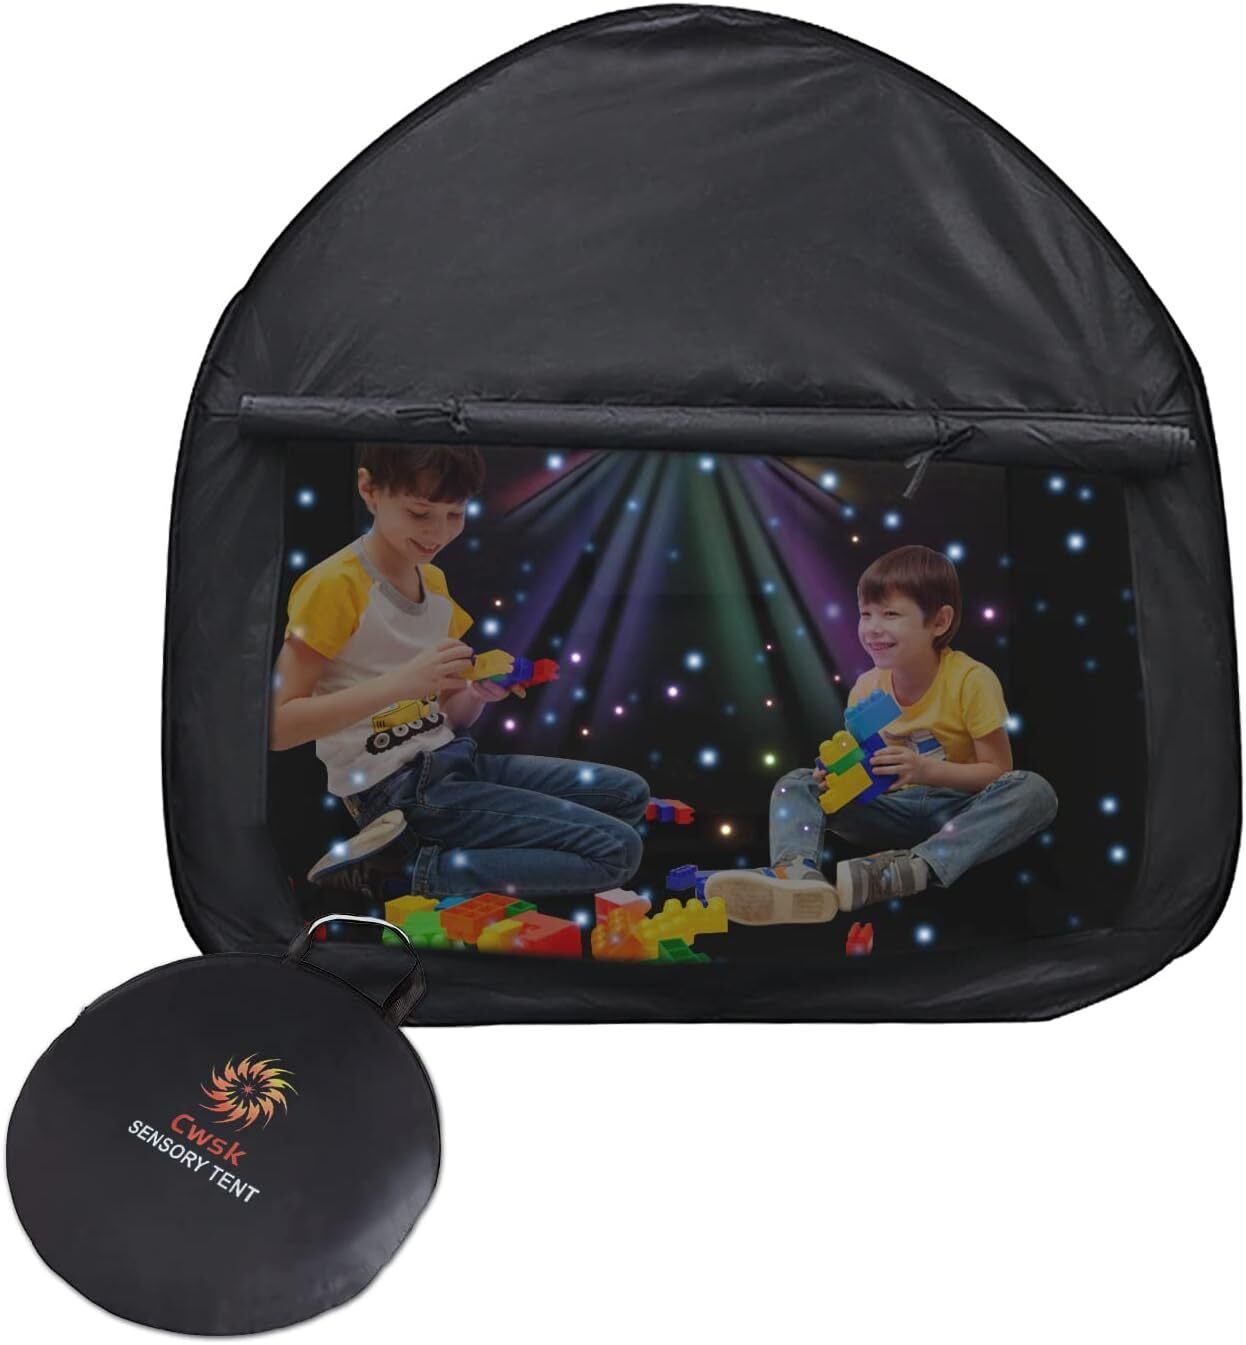 Sensory Tent Calming Hideout for Kids with CPC Medium, Black 